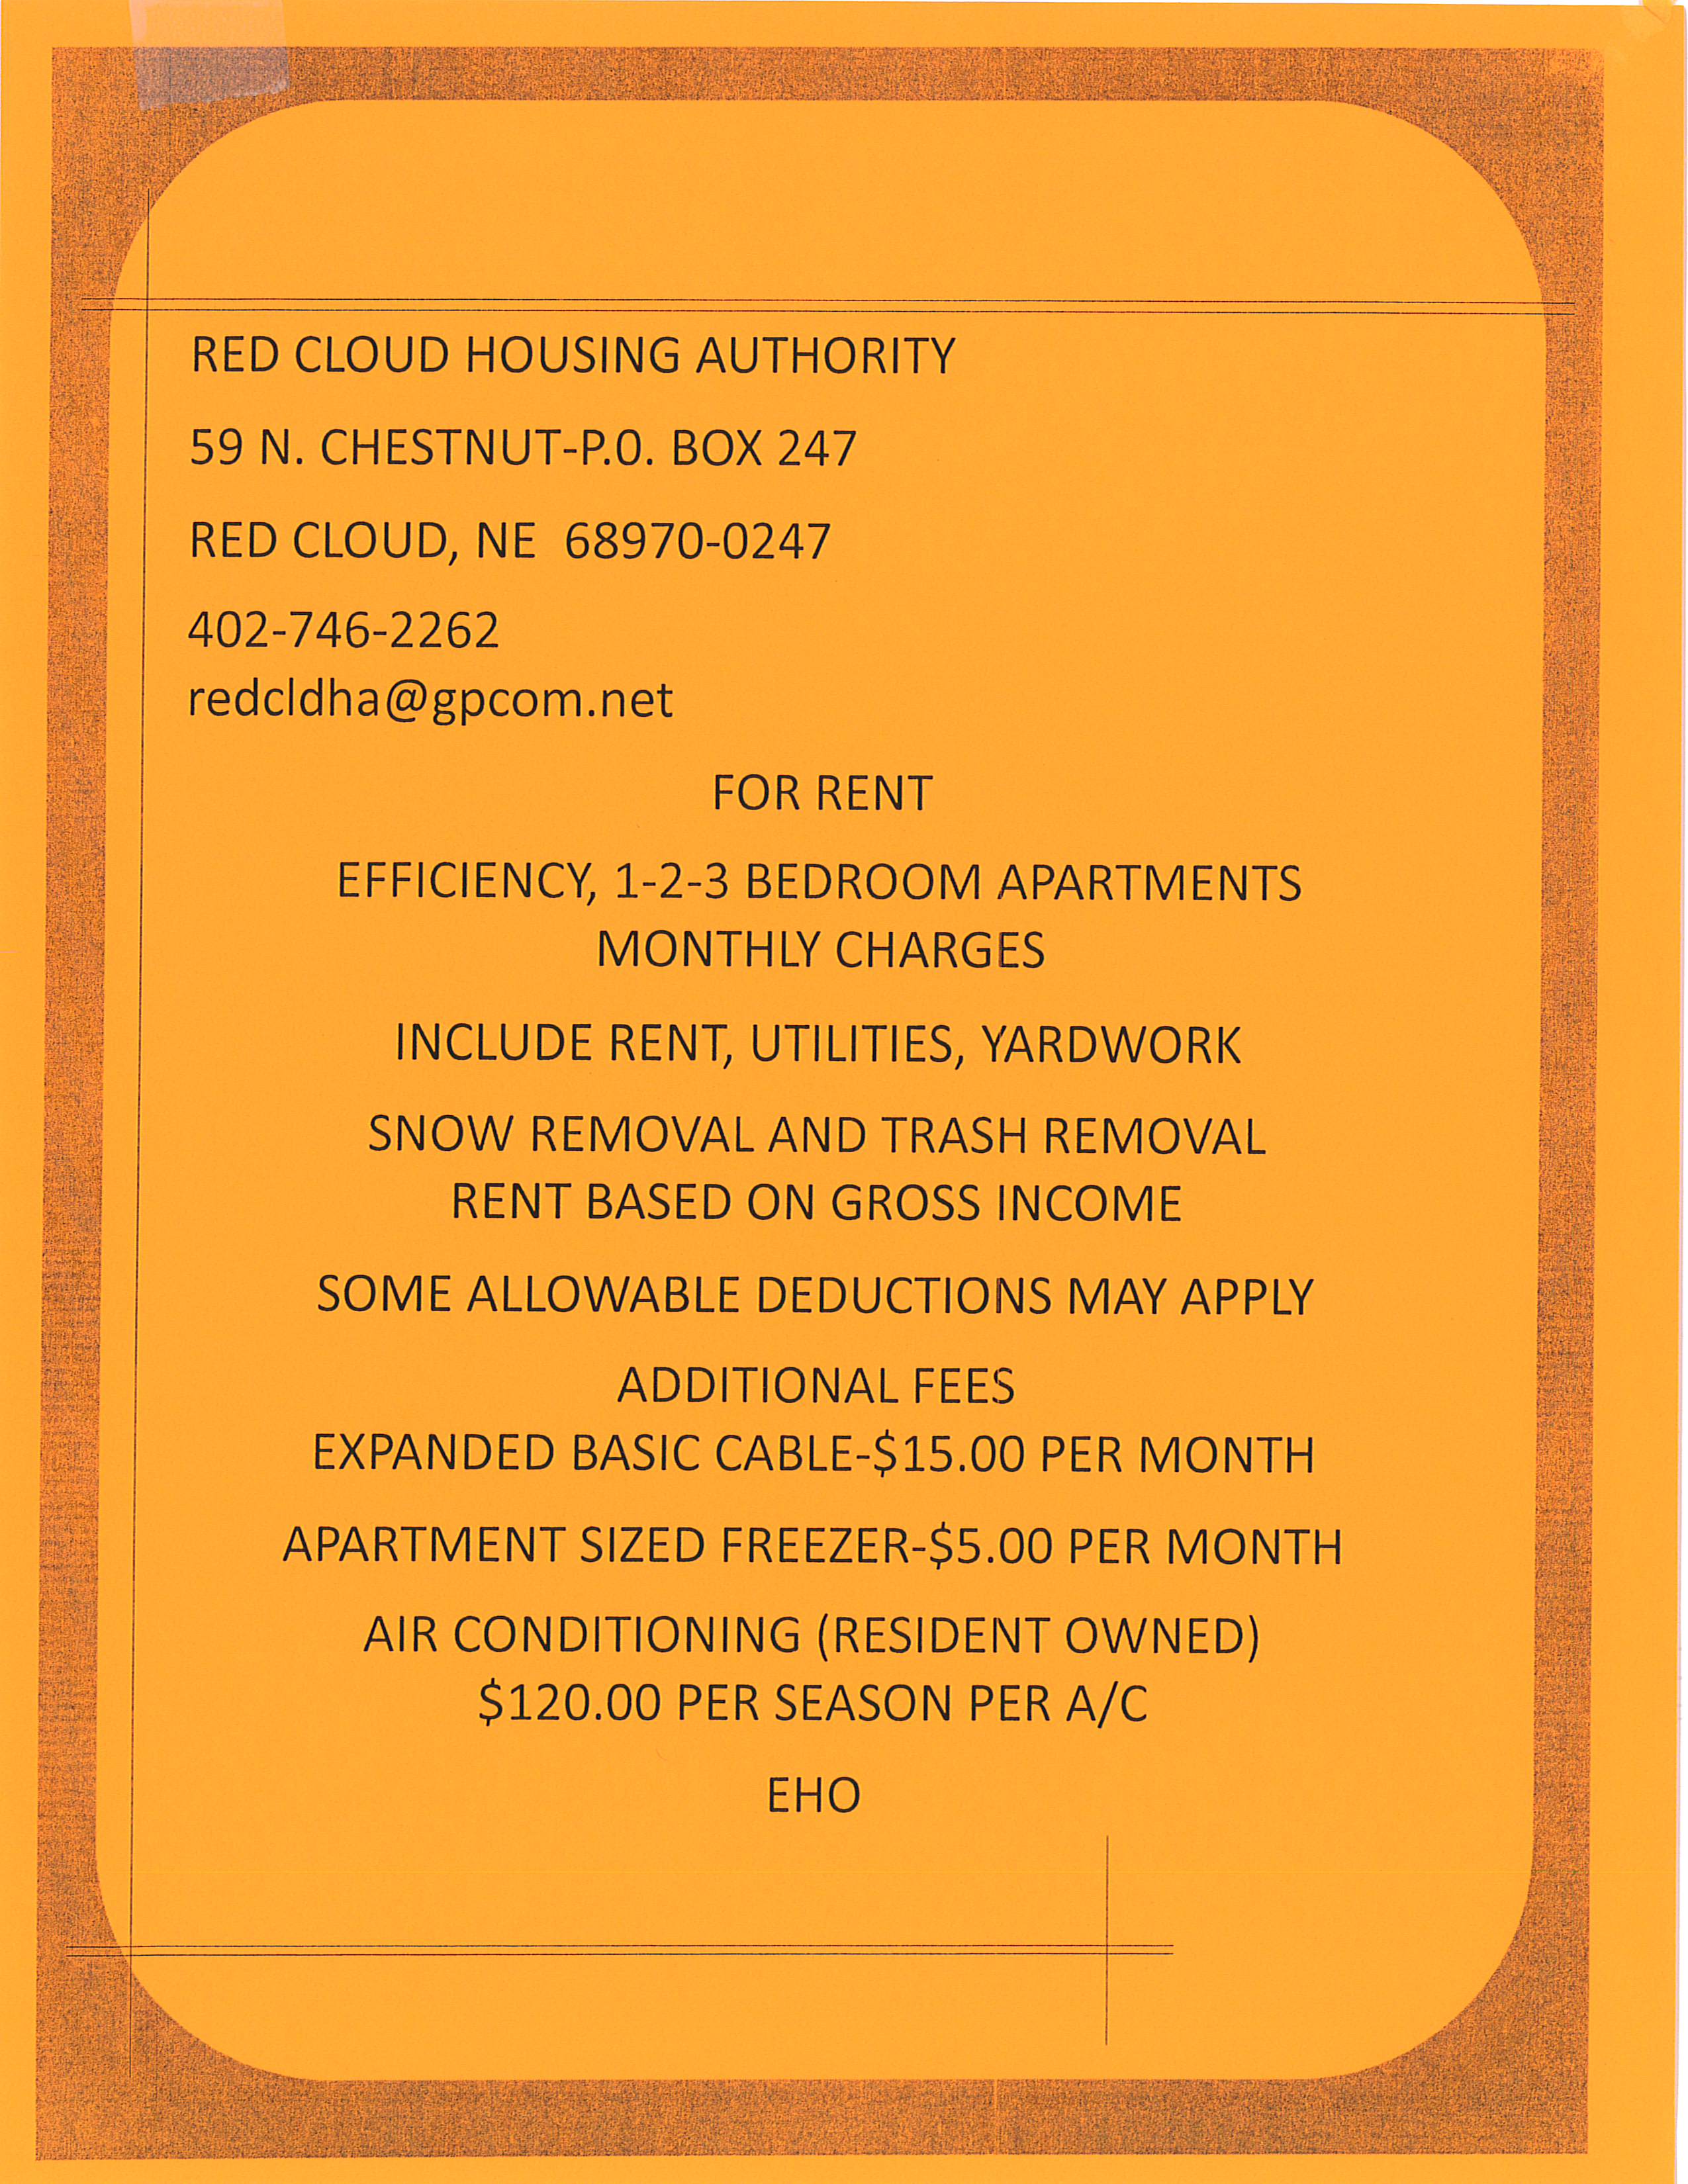 Red Cloud Yellow Logo - Red Cloud Housing Authority. Red Cloud, Nebraska's Most